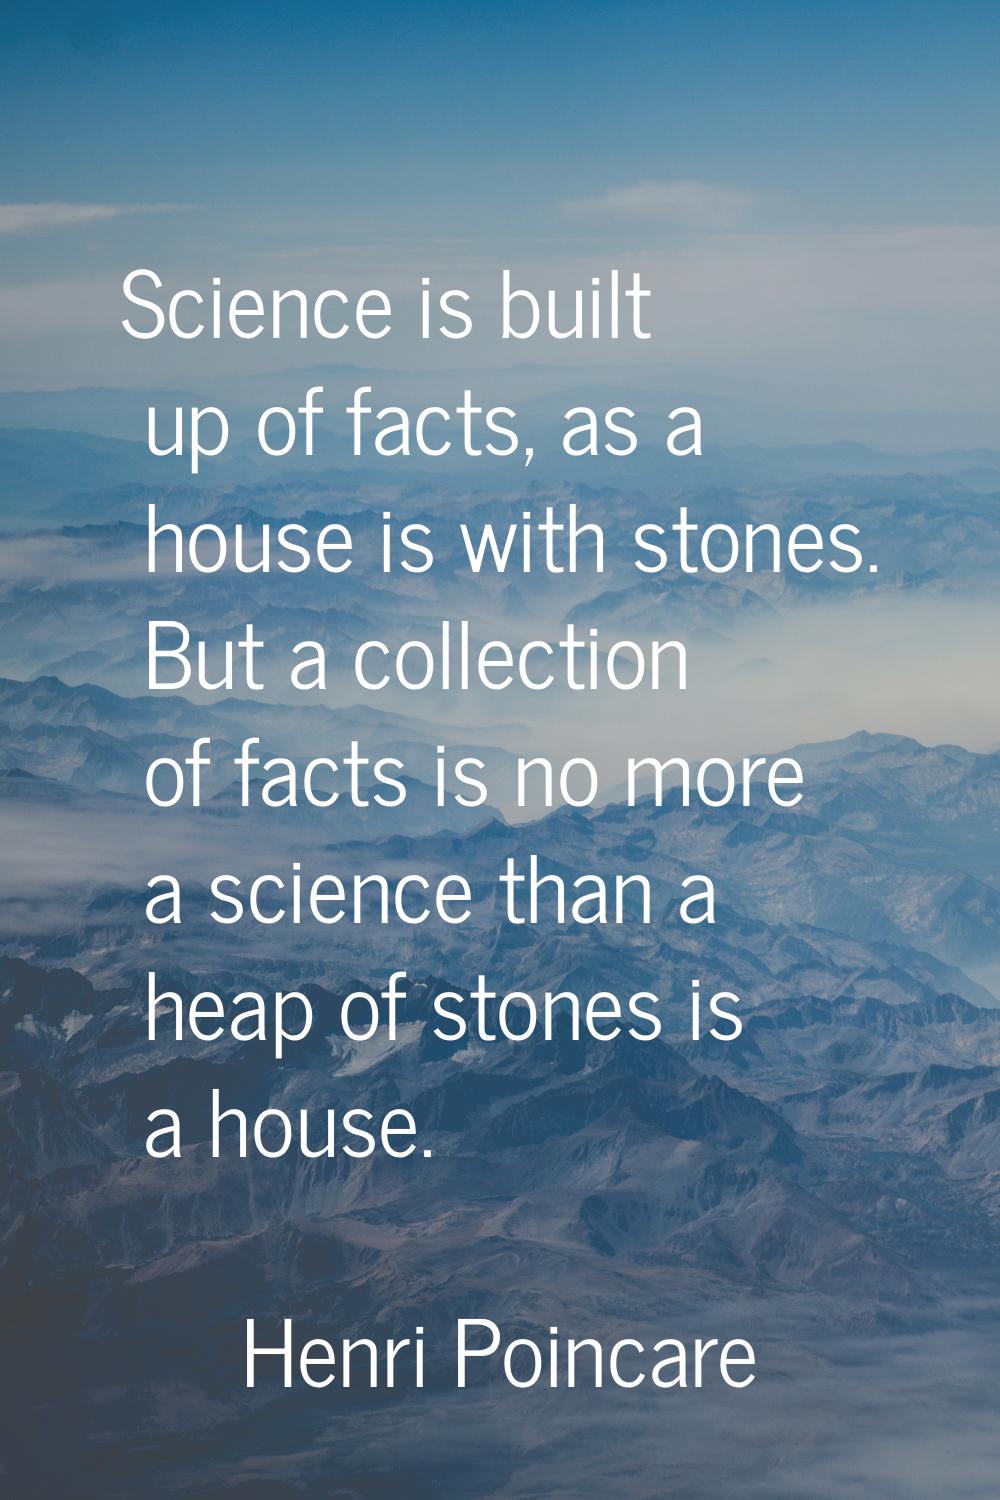 Science is built up of facts, as a house is with stones. But a collection of facts is no more a sci